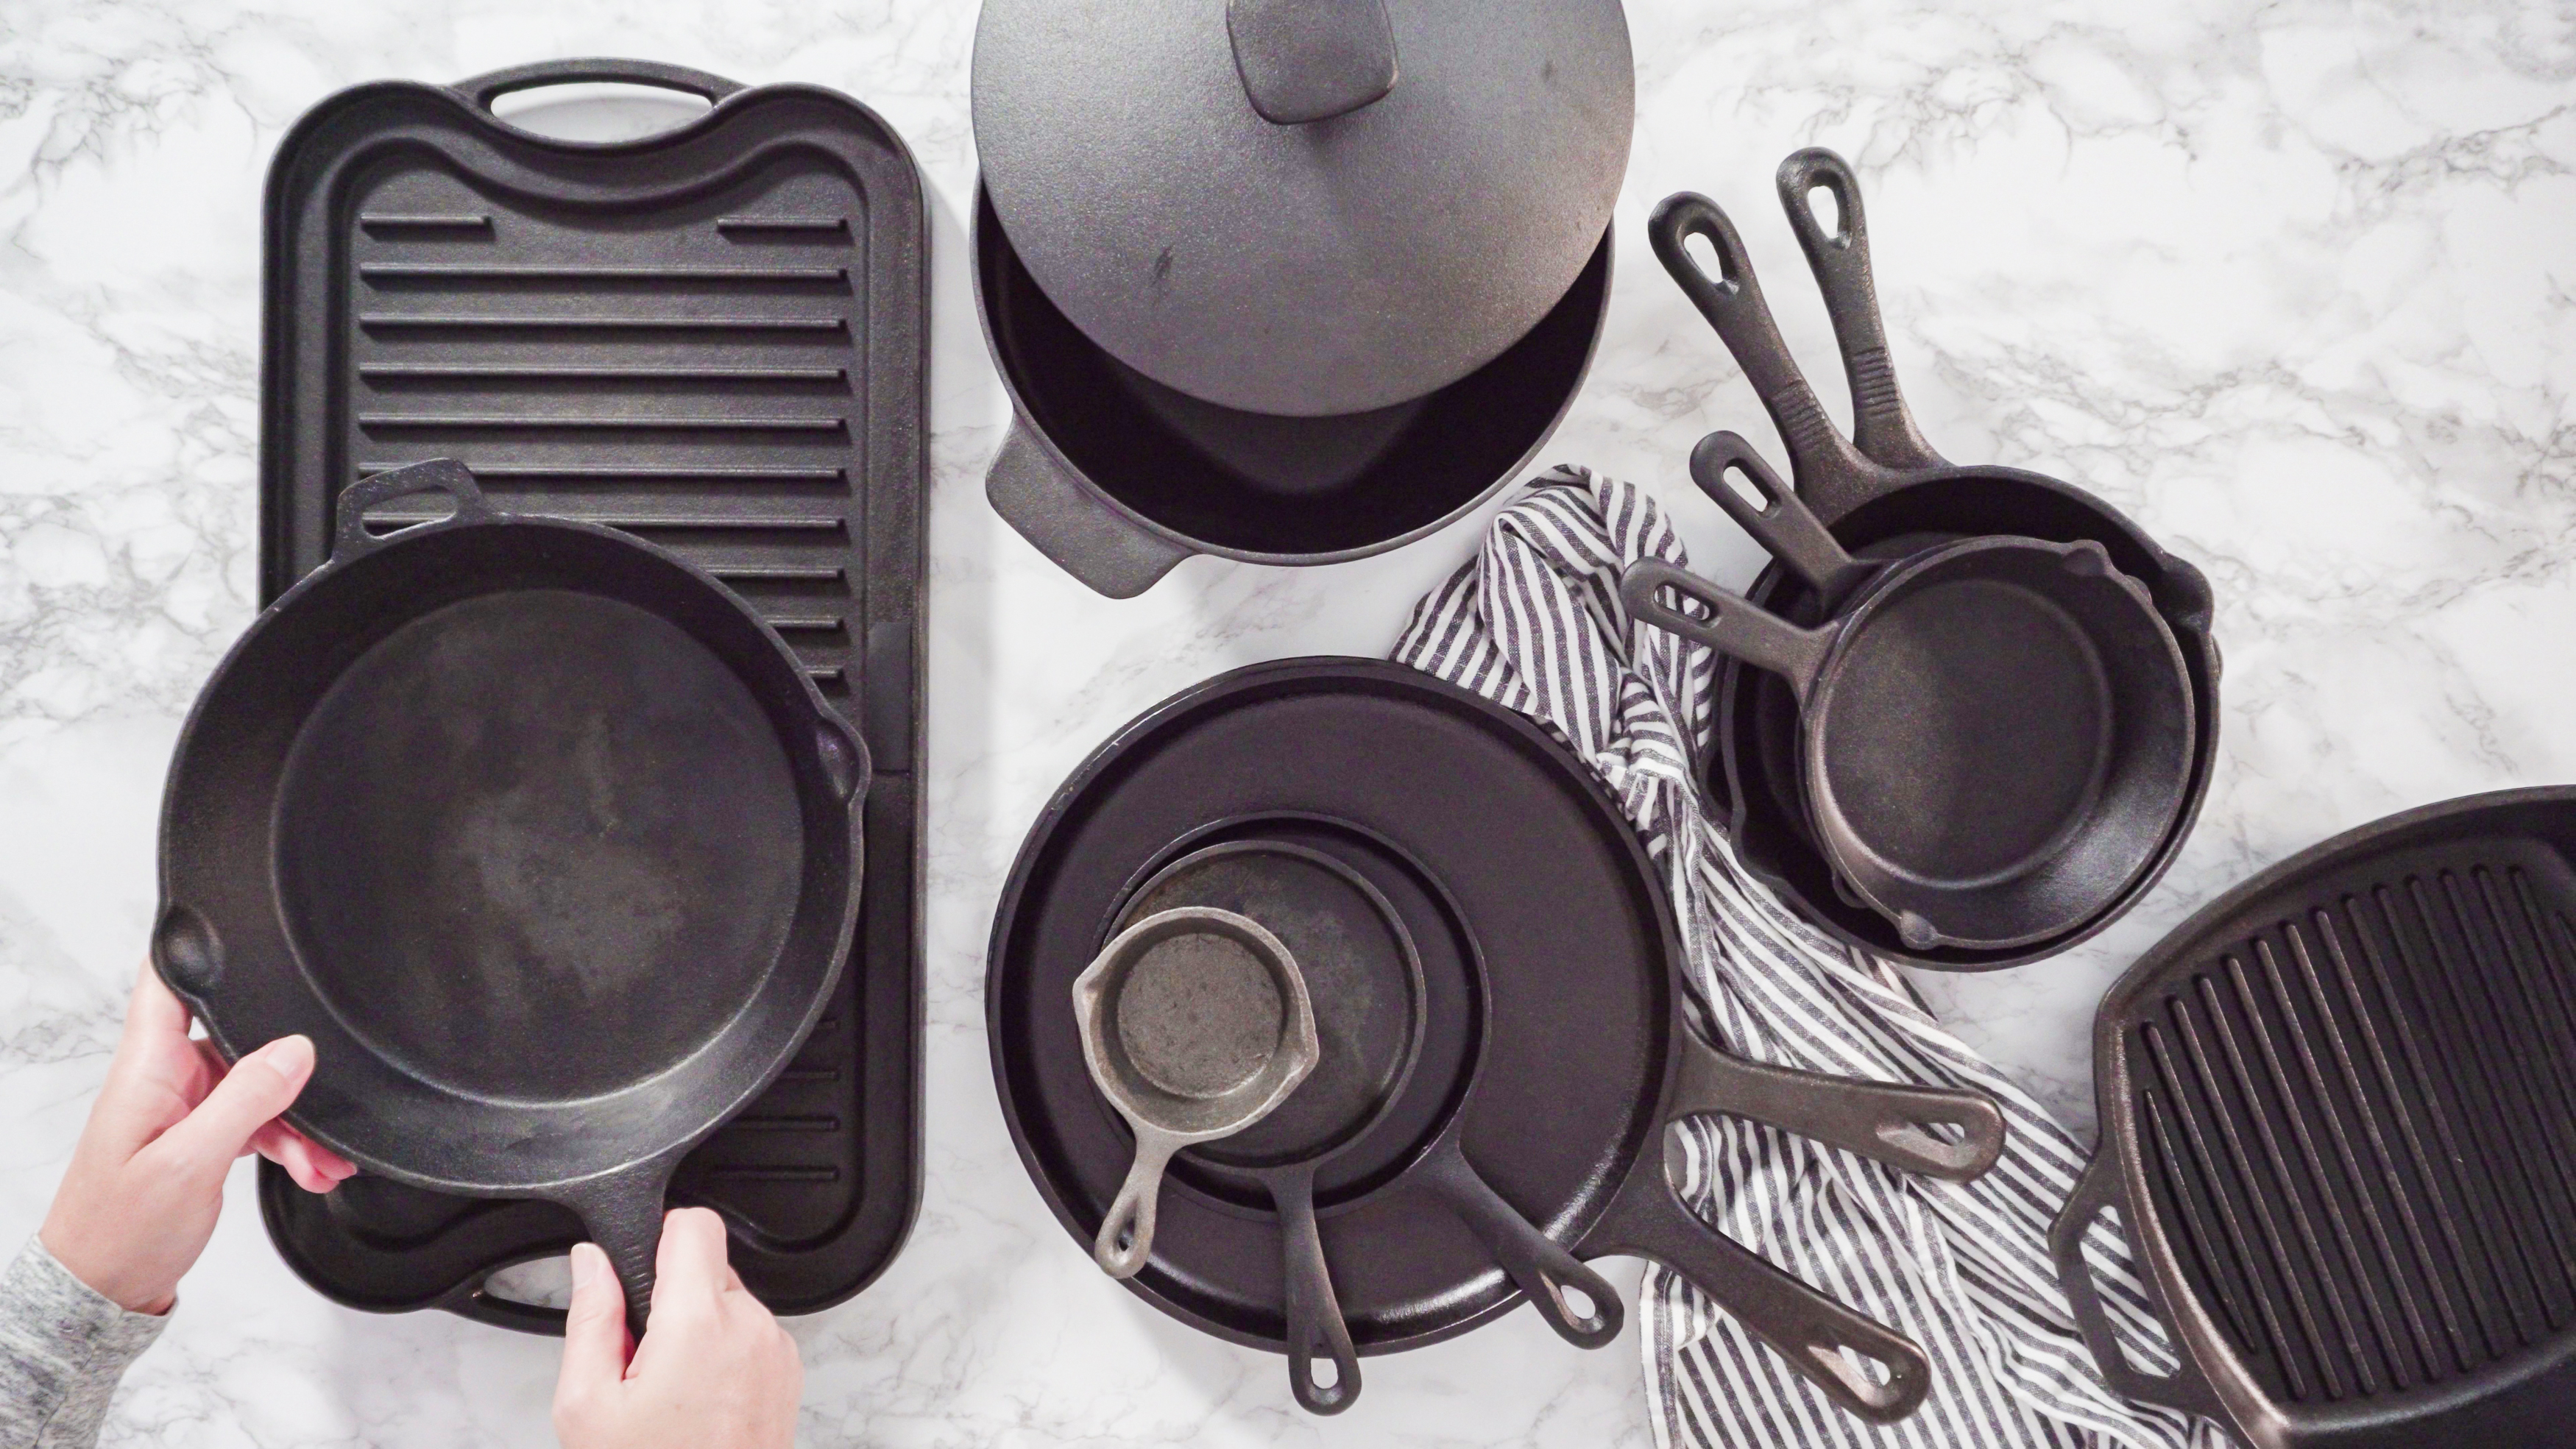 Overhead view of several different types of cast iron skillets on a table